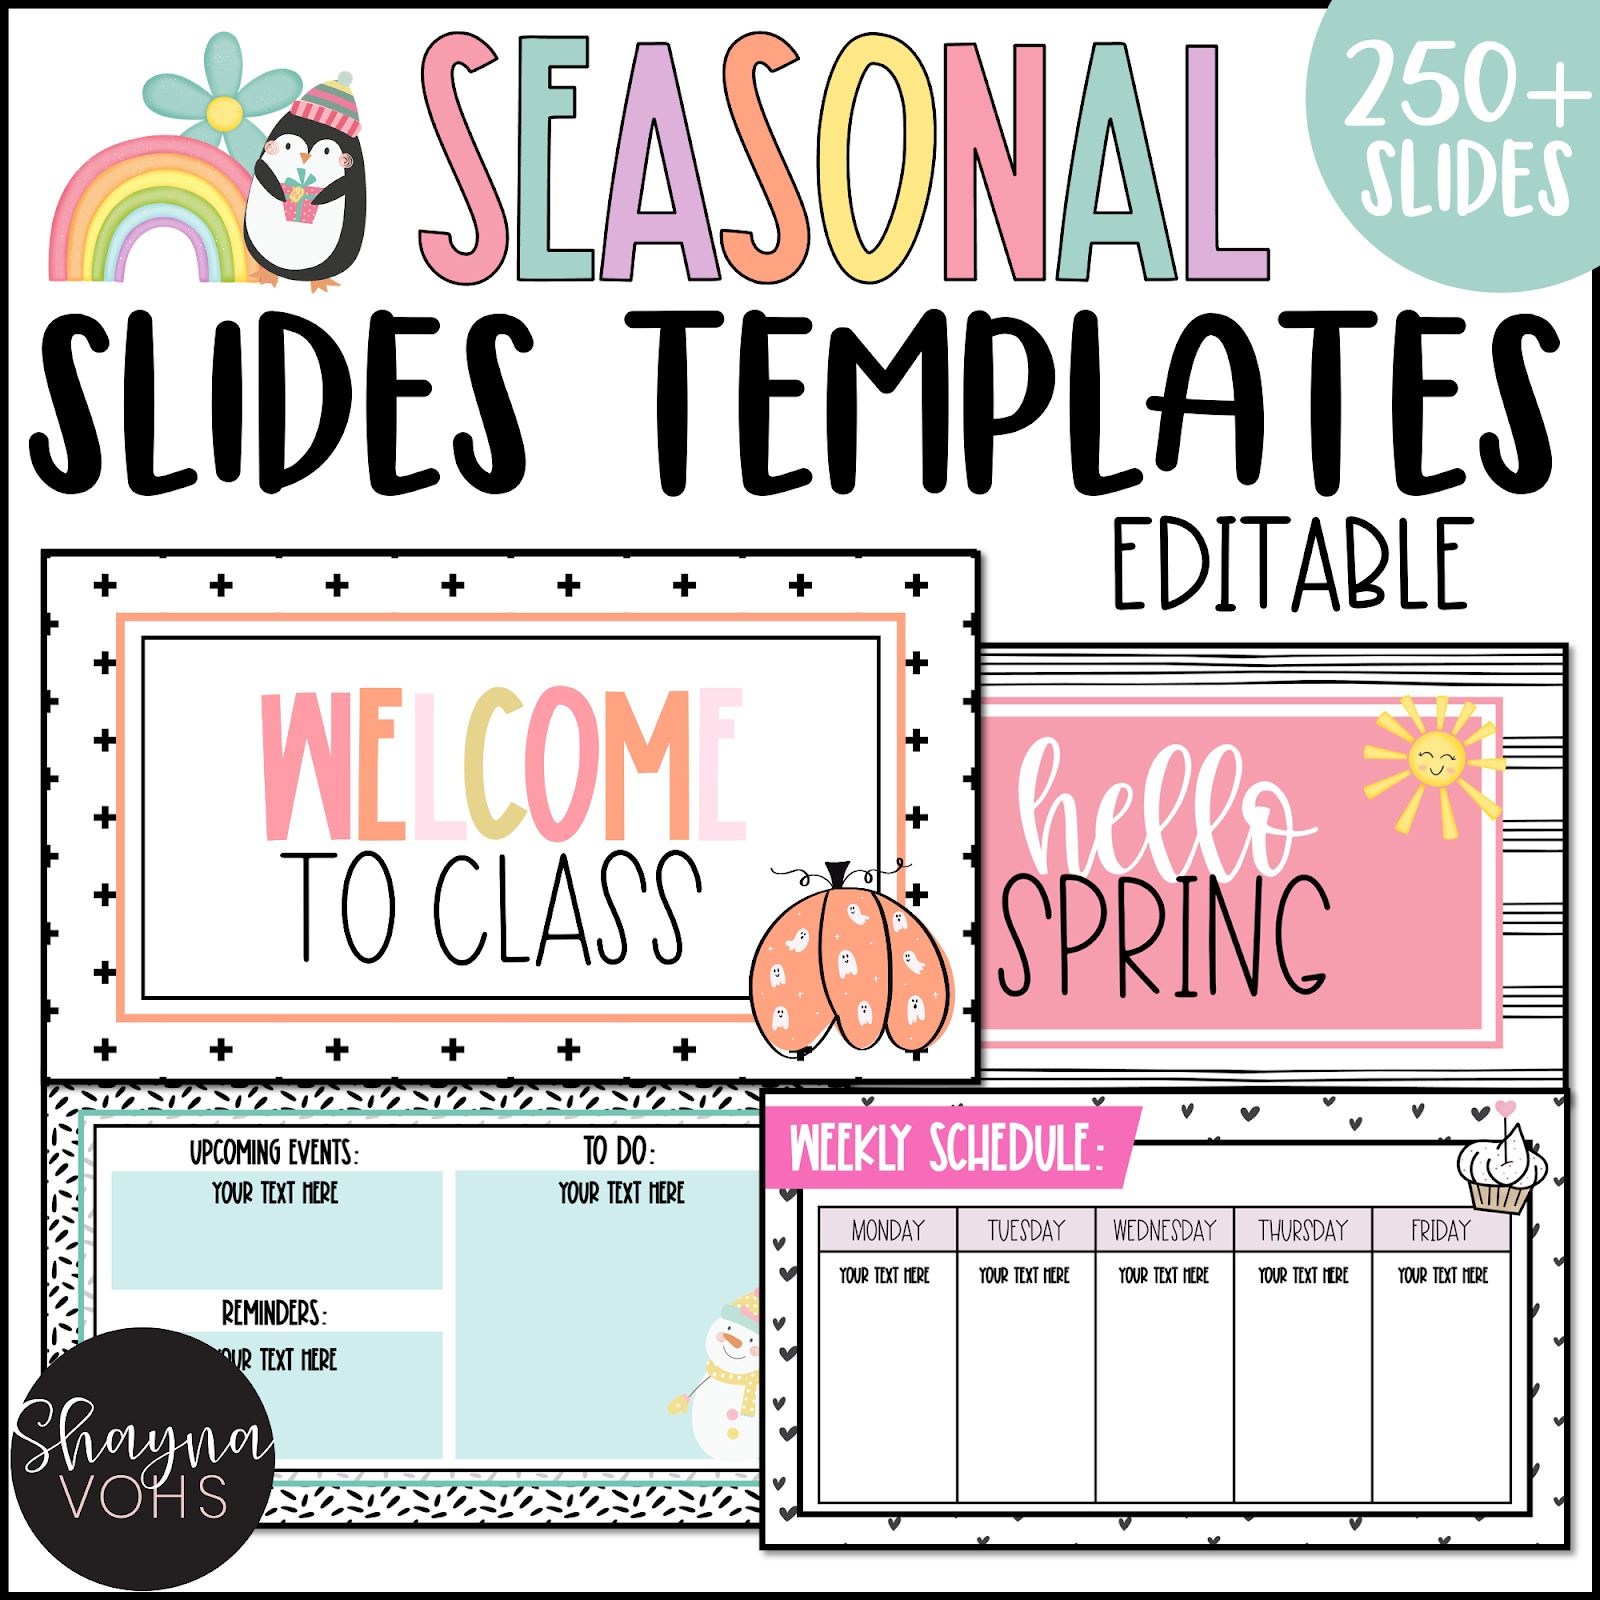 This image shows a selection of four different slide templates. They are a mixture of different seasonal themes. The text at the top reads "Seasonal Slides Templates Editable". 